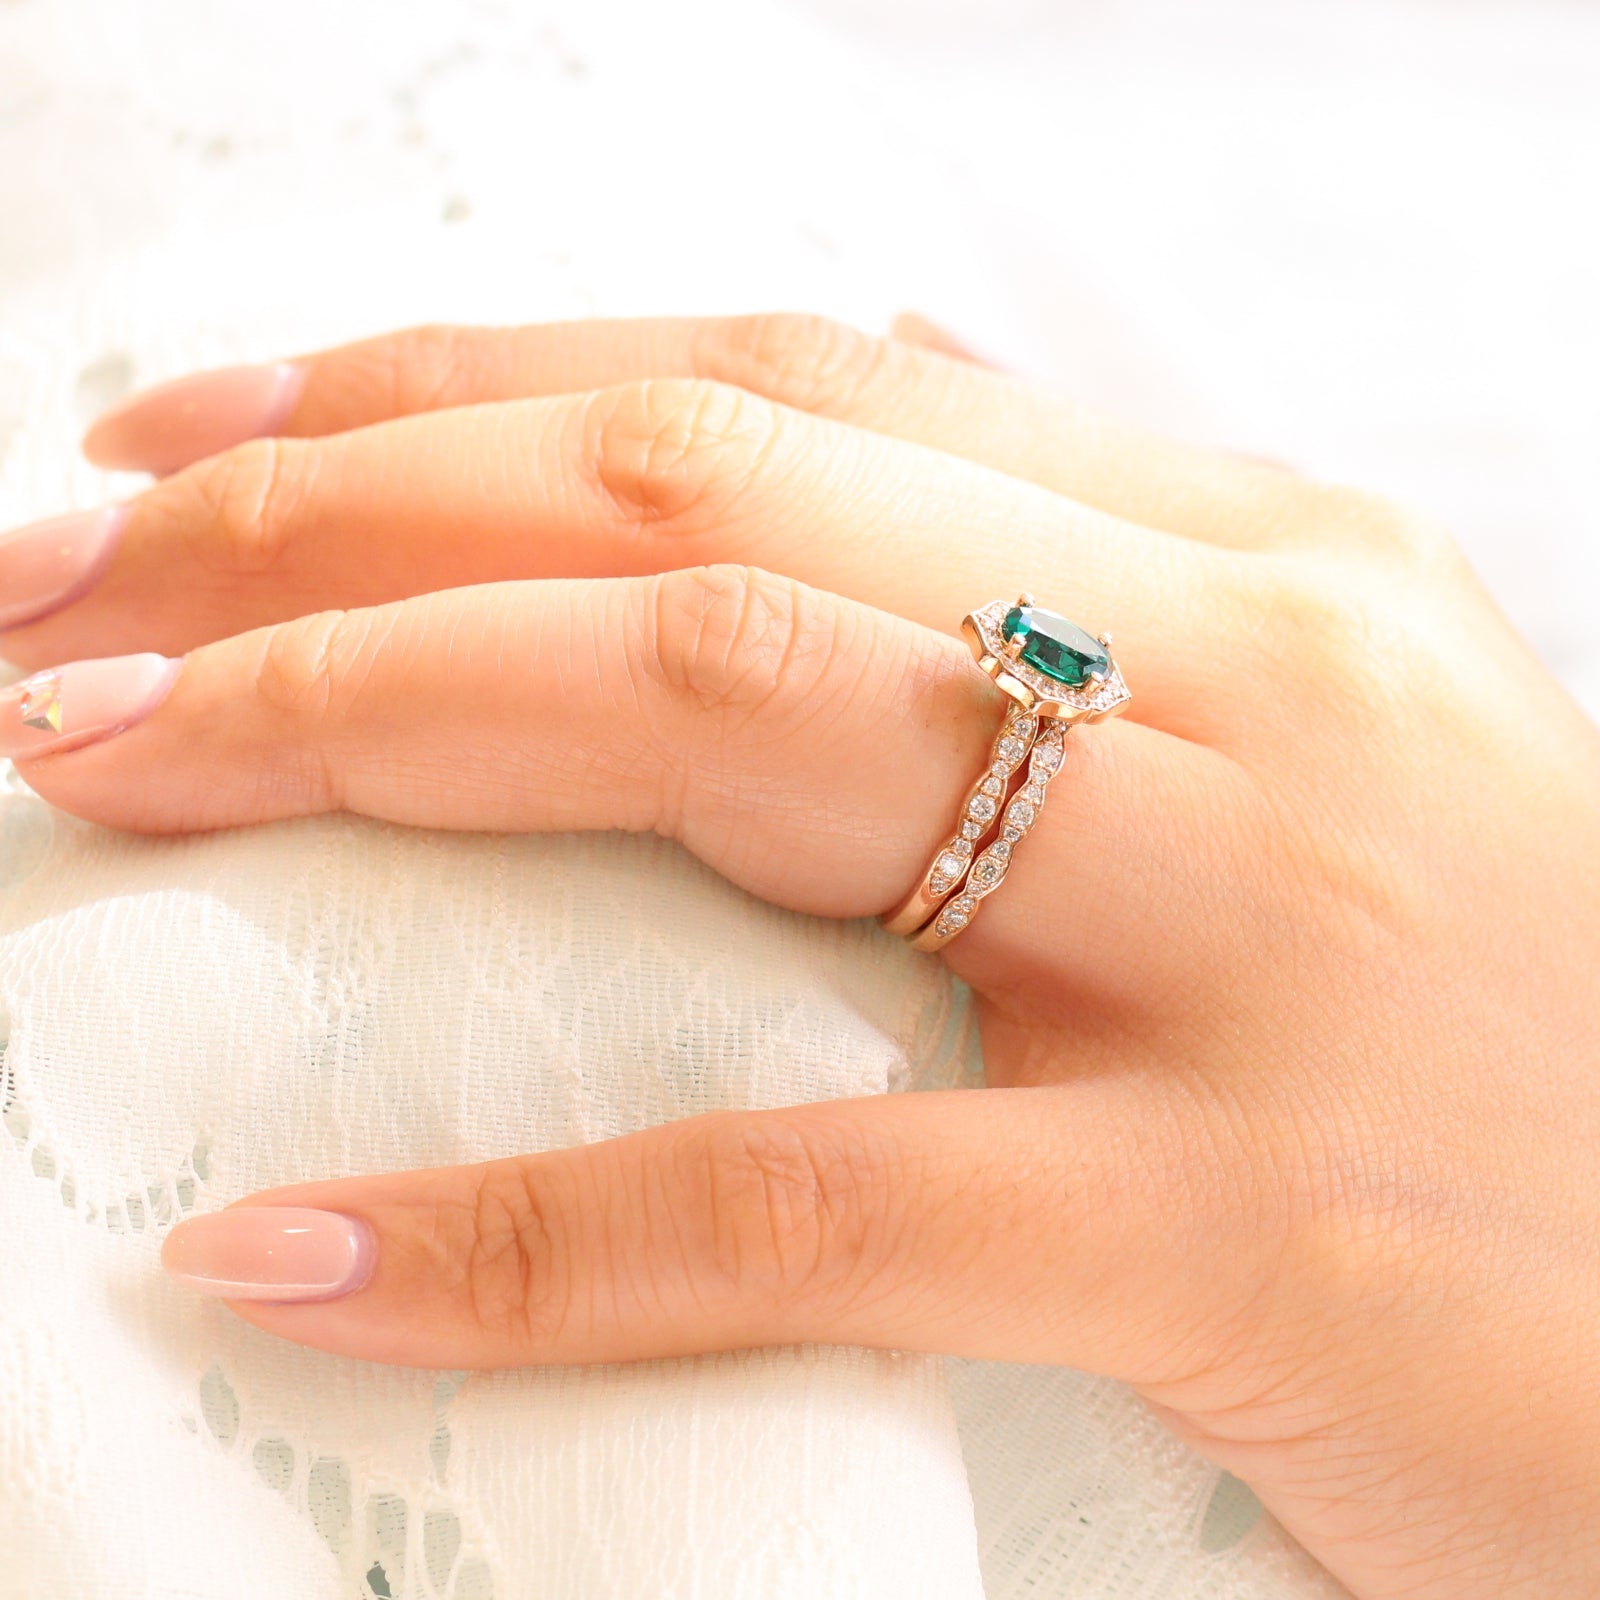 vintage inspired emerald ring and matching diamond wedding band in rose gold bridal set by la more design jewelry